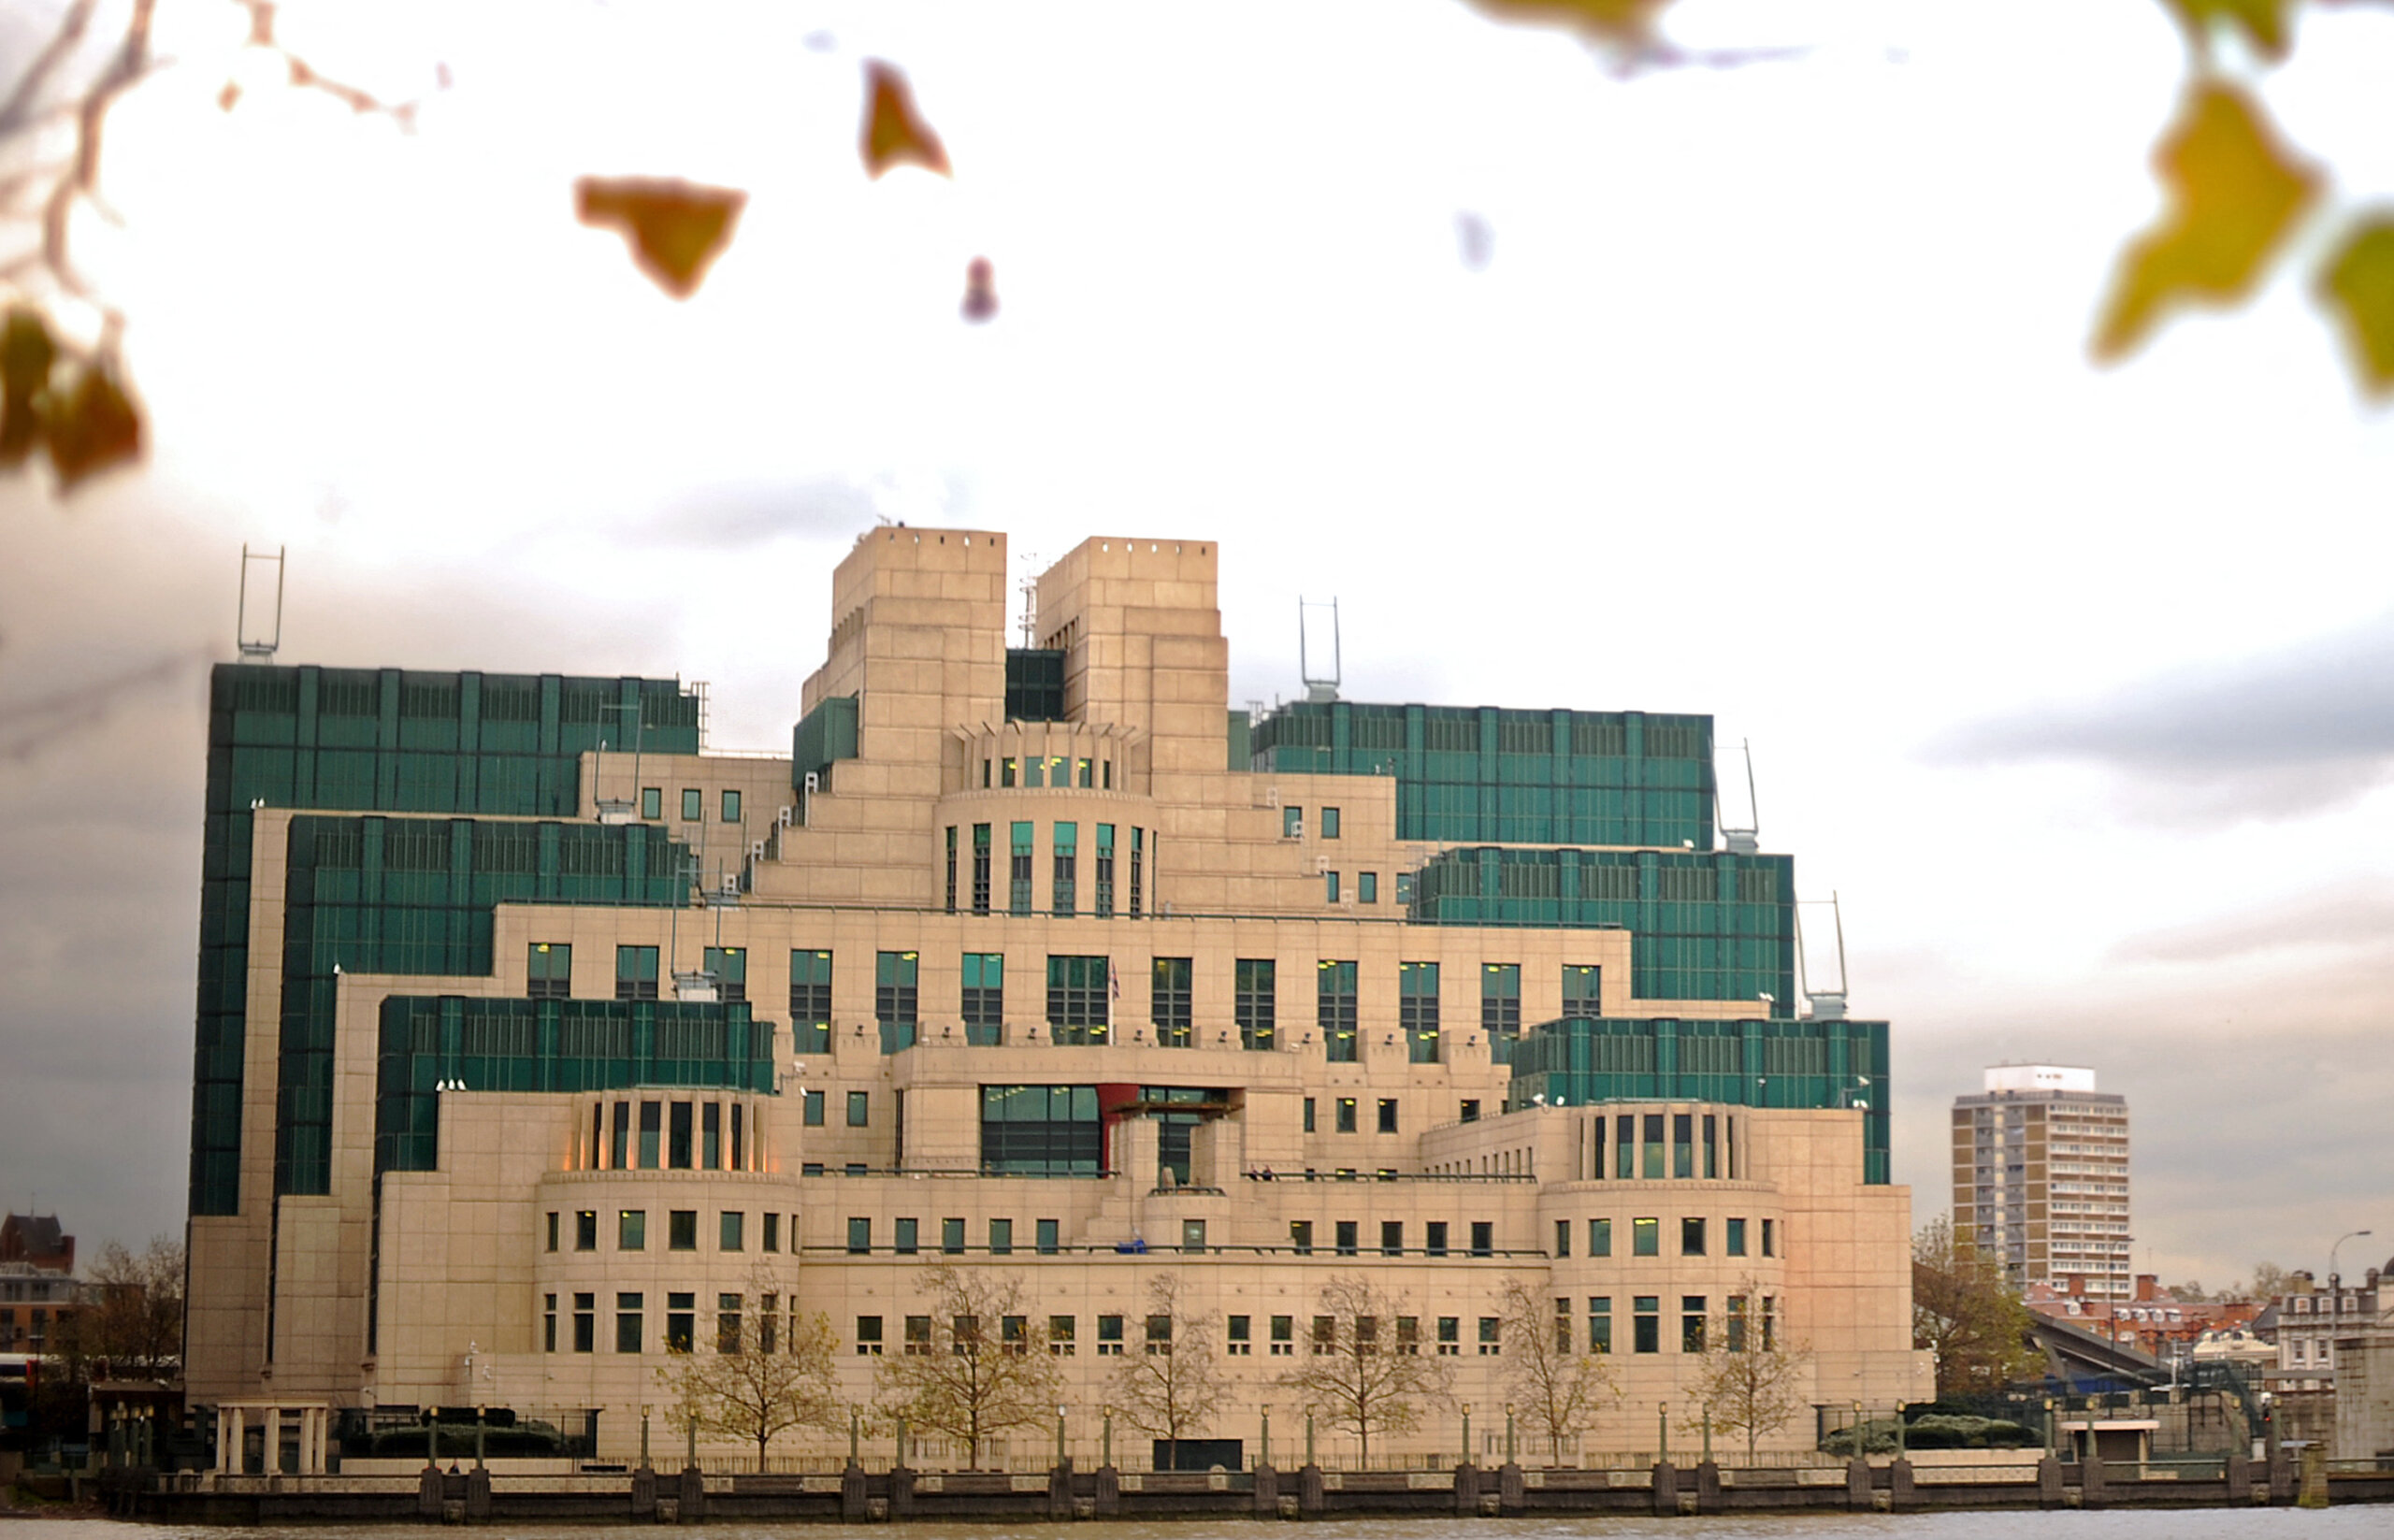 Head of British intelligence agency MI6 said the country's enemies were pouring "money and ambition" into mastering innovation like AI